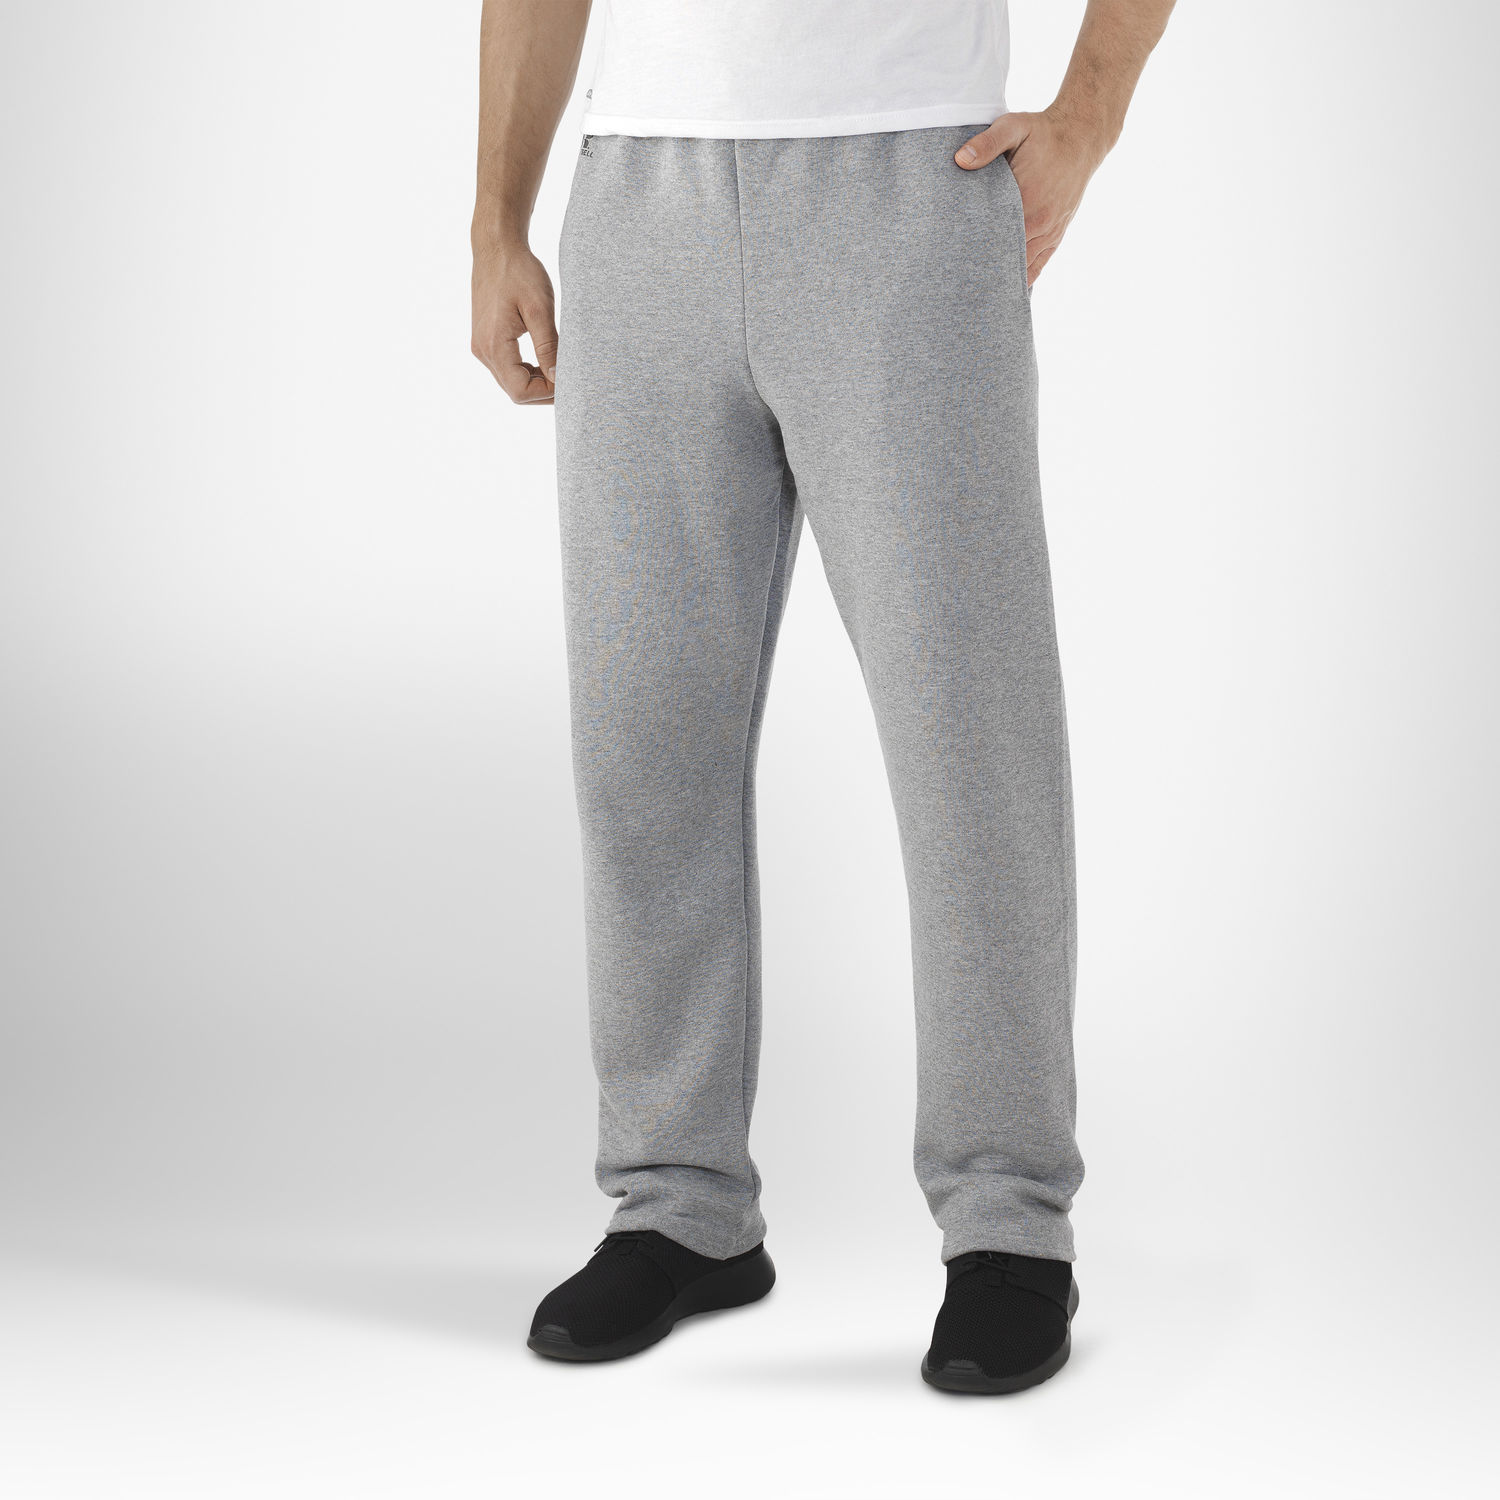 Russell Athletic Mens Men/'s Pocket Pant